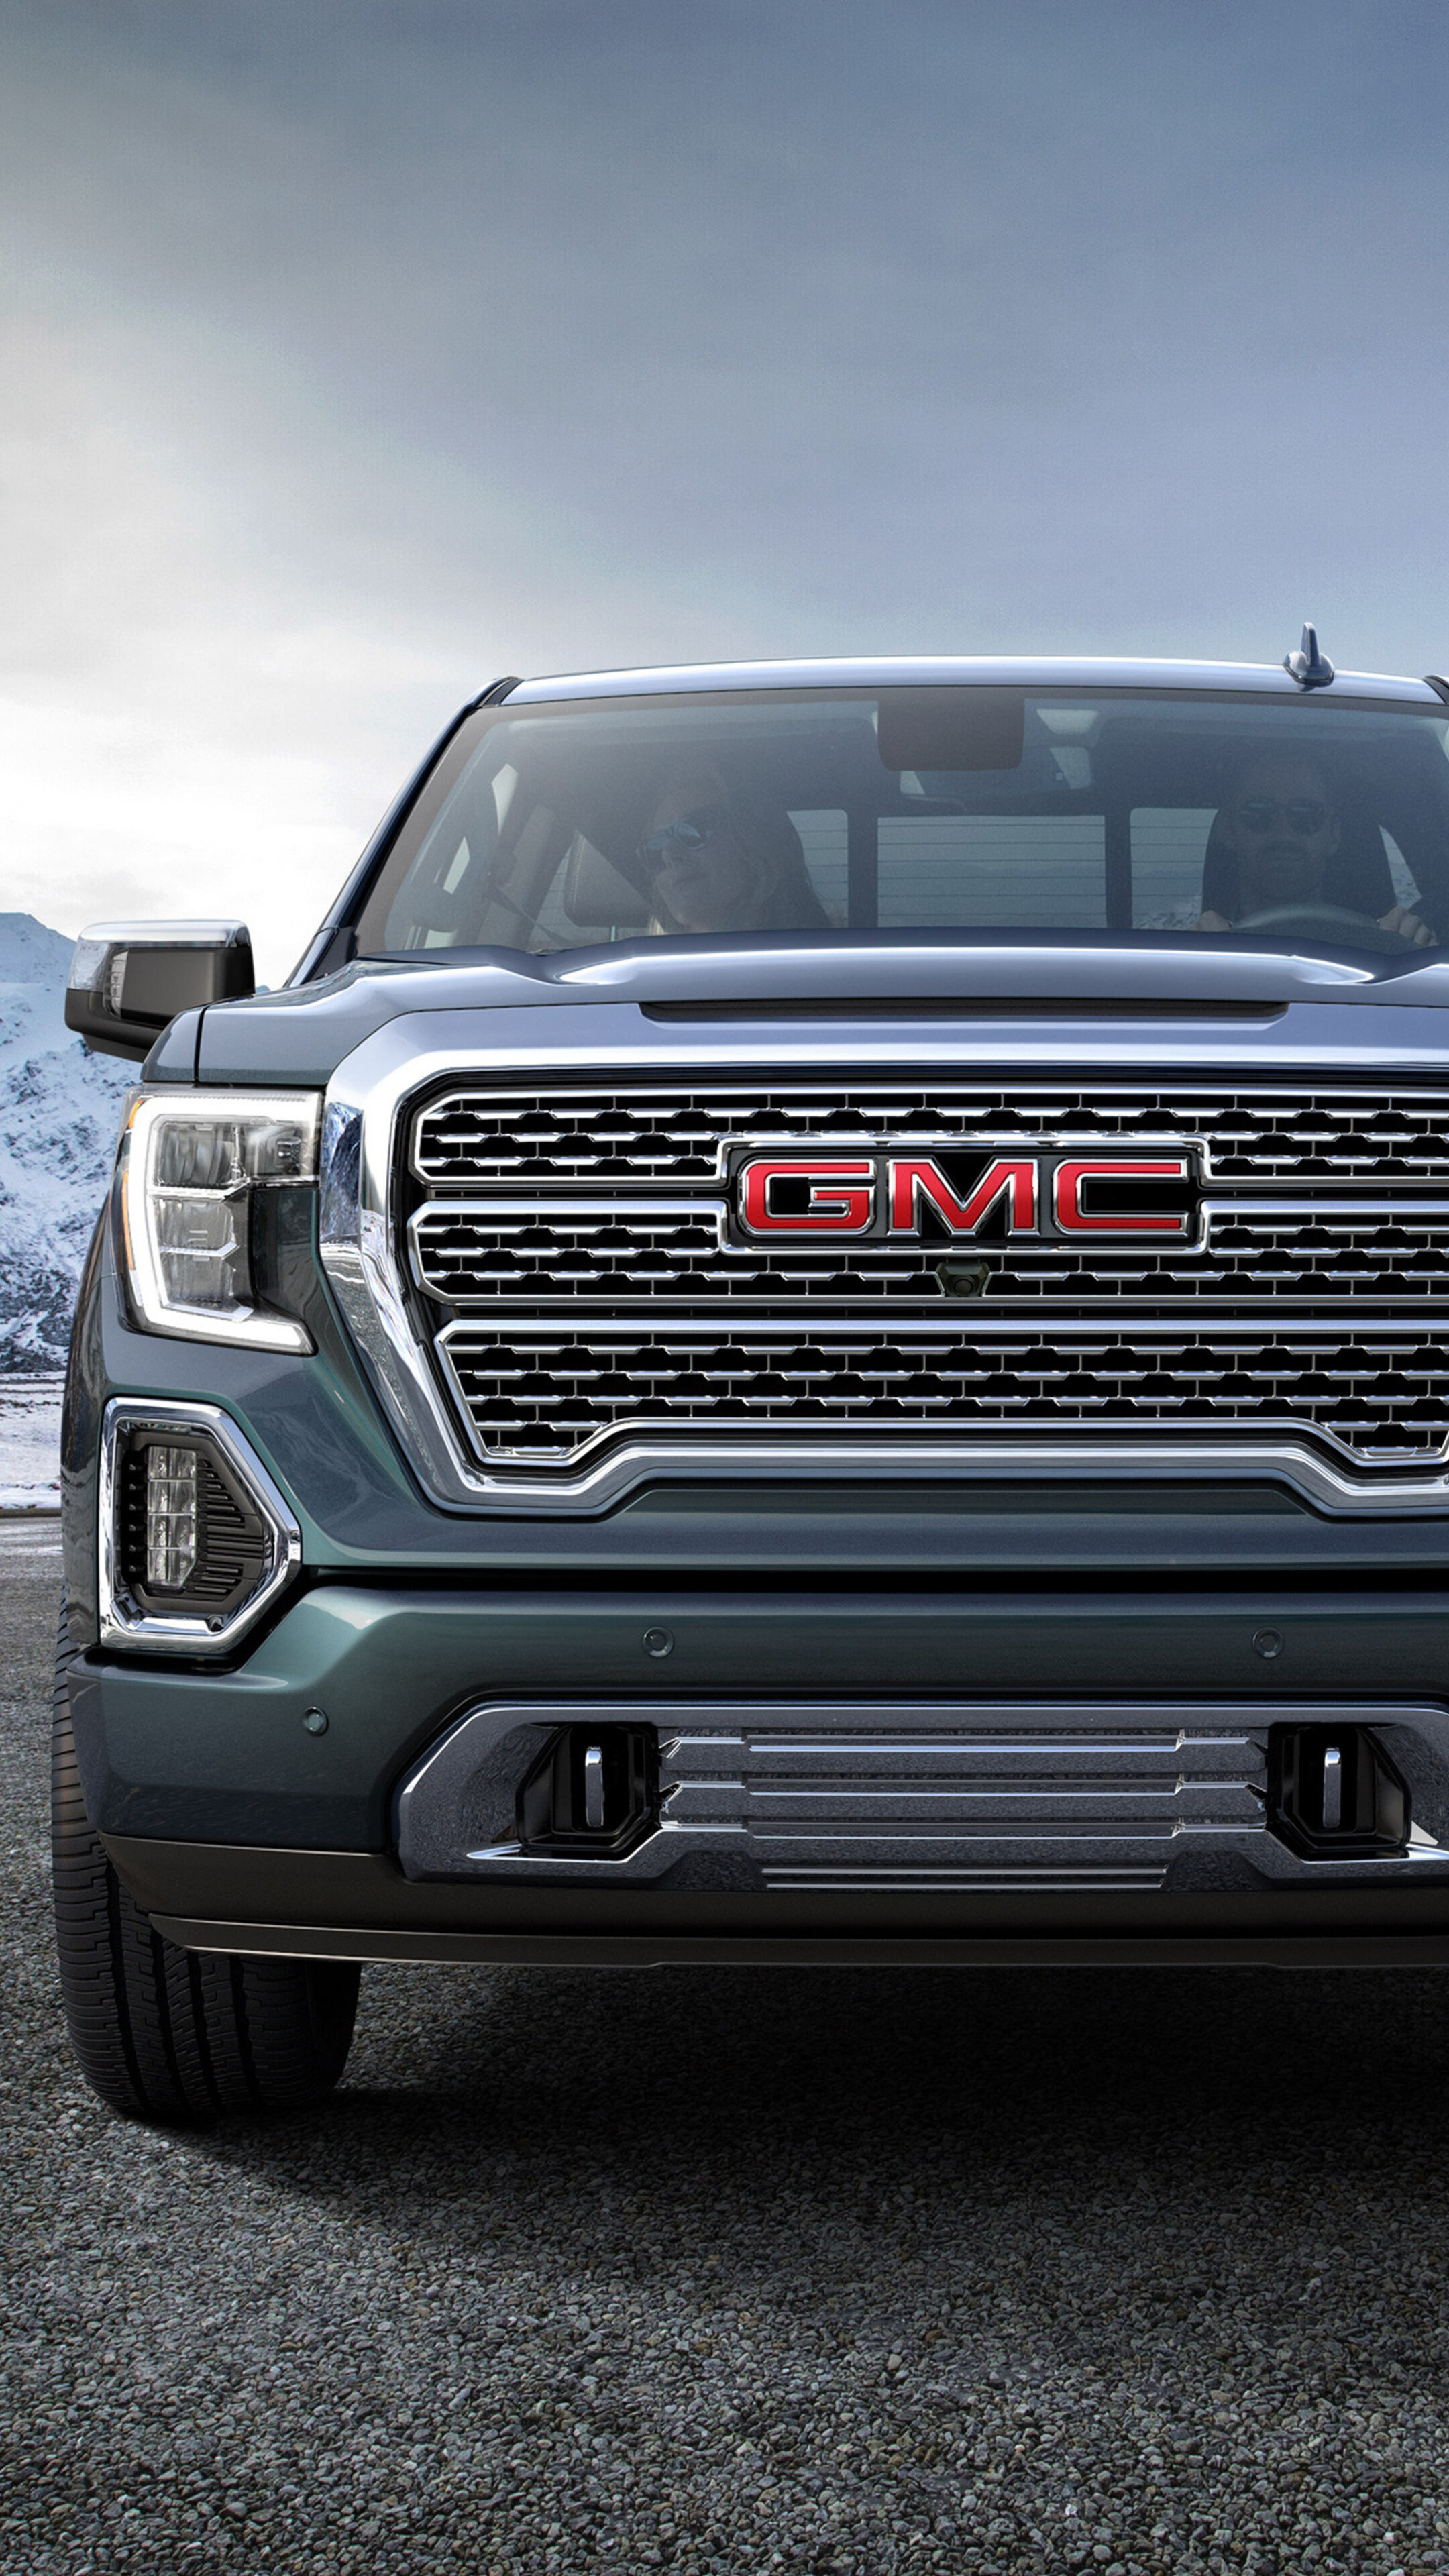 GMC: 2019 Sierra, 6.2L V8 engine with 10-speed automatic transmission, Off-road truck. 2160x3840 4K Background.